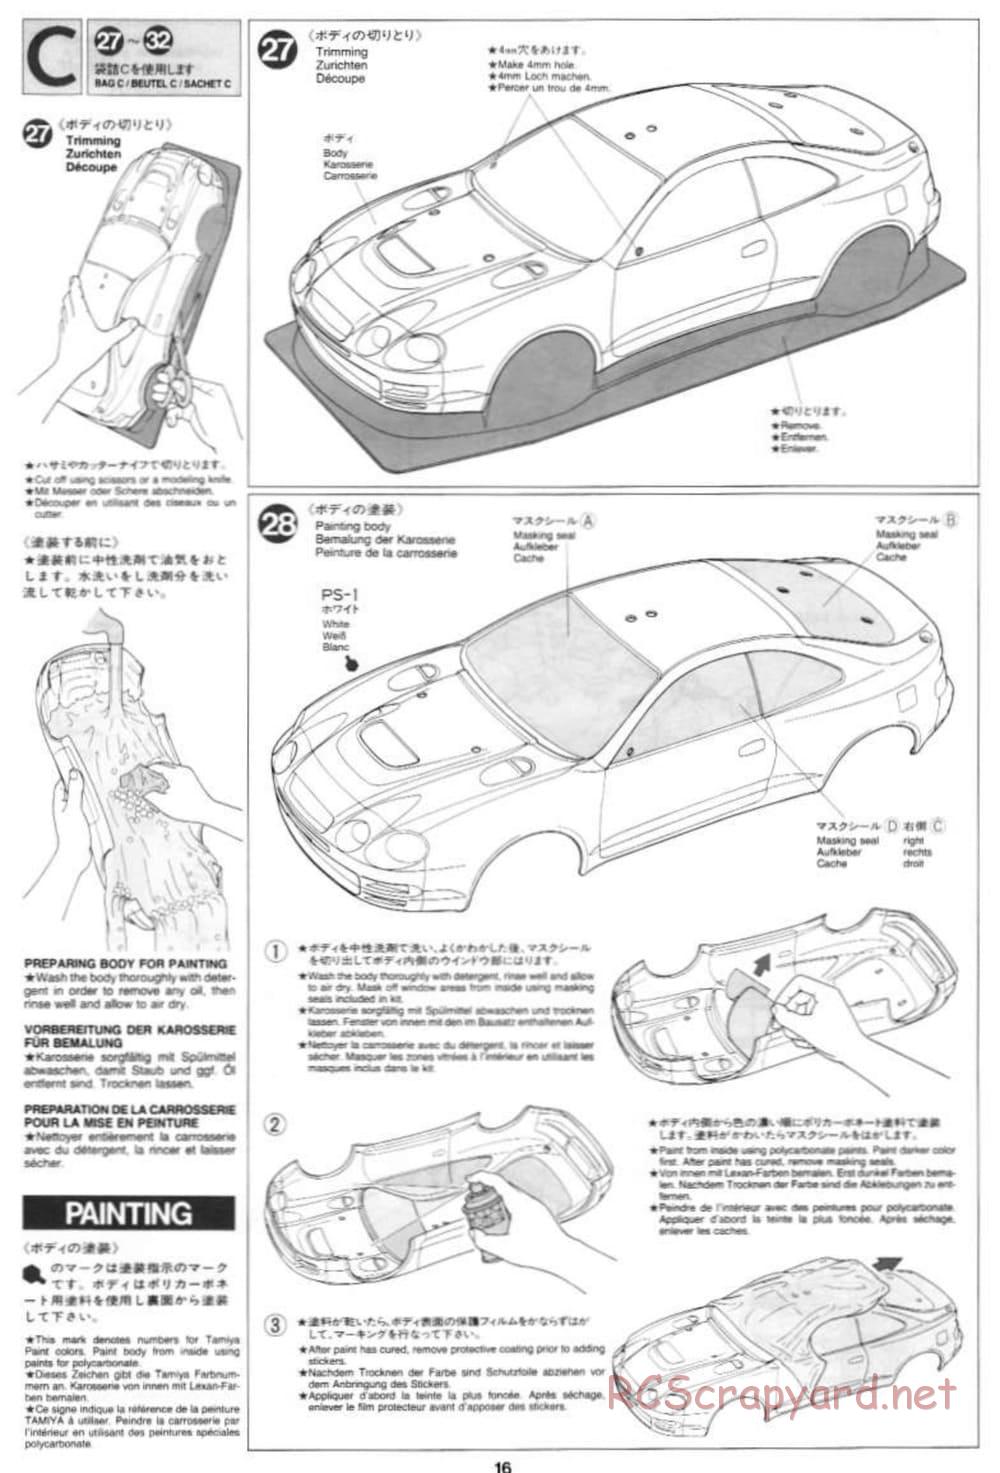 Tamiya - Toyota Celica GT-Four 97 Monte Carlo - TL-01 Chassis - Manual - Page 16